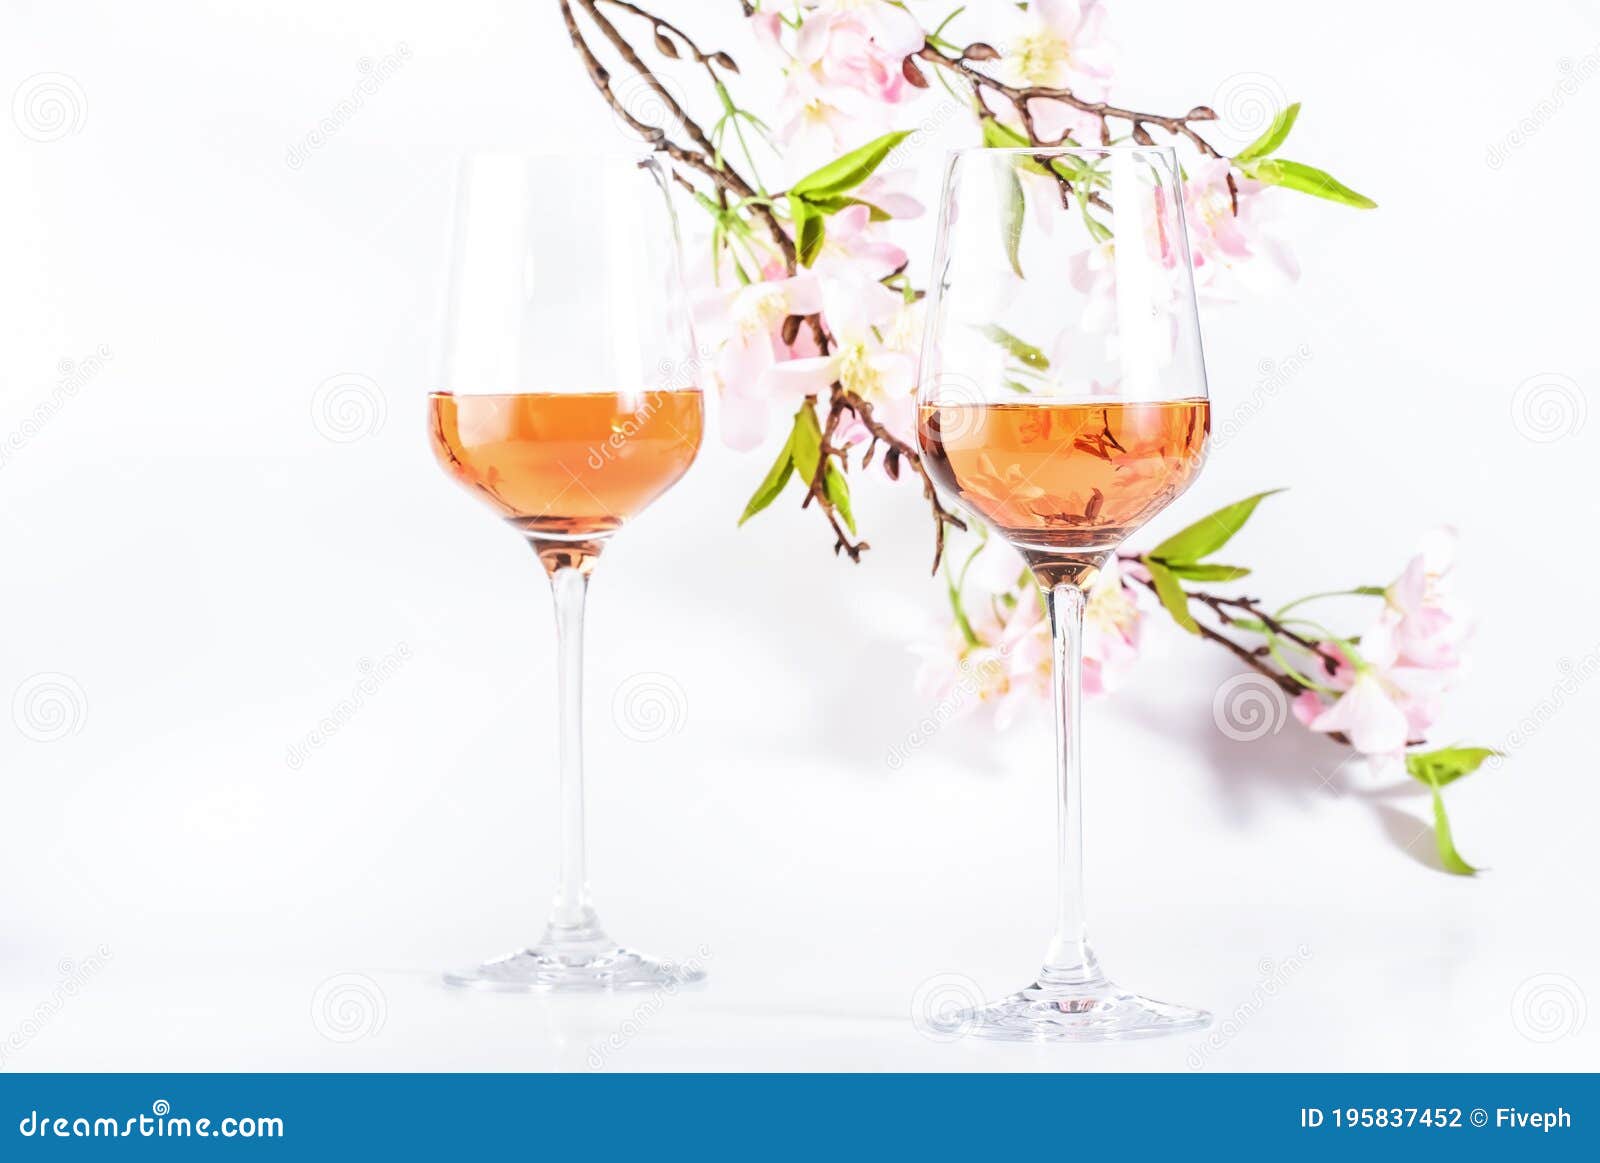 rose wine glass with bottle on the white table and pink flowers. rosado, rosato or blush wine tasting in wineshop, bar concept.